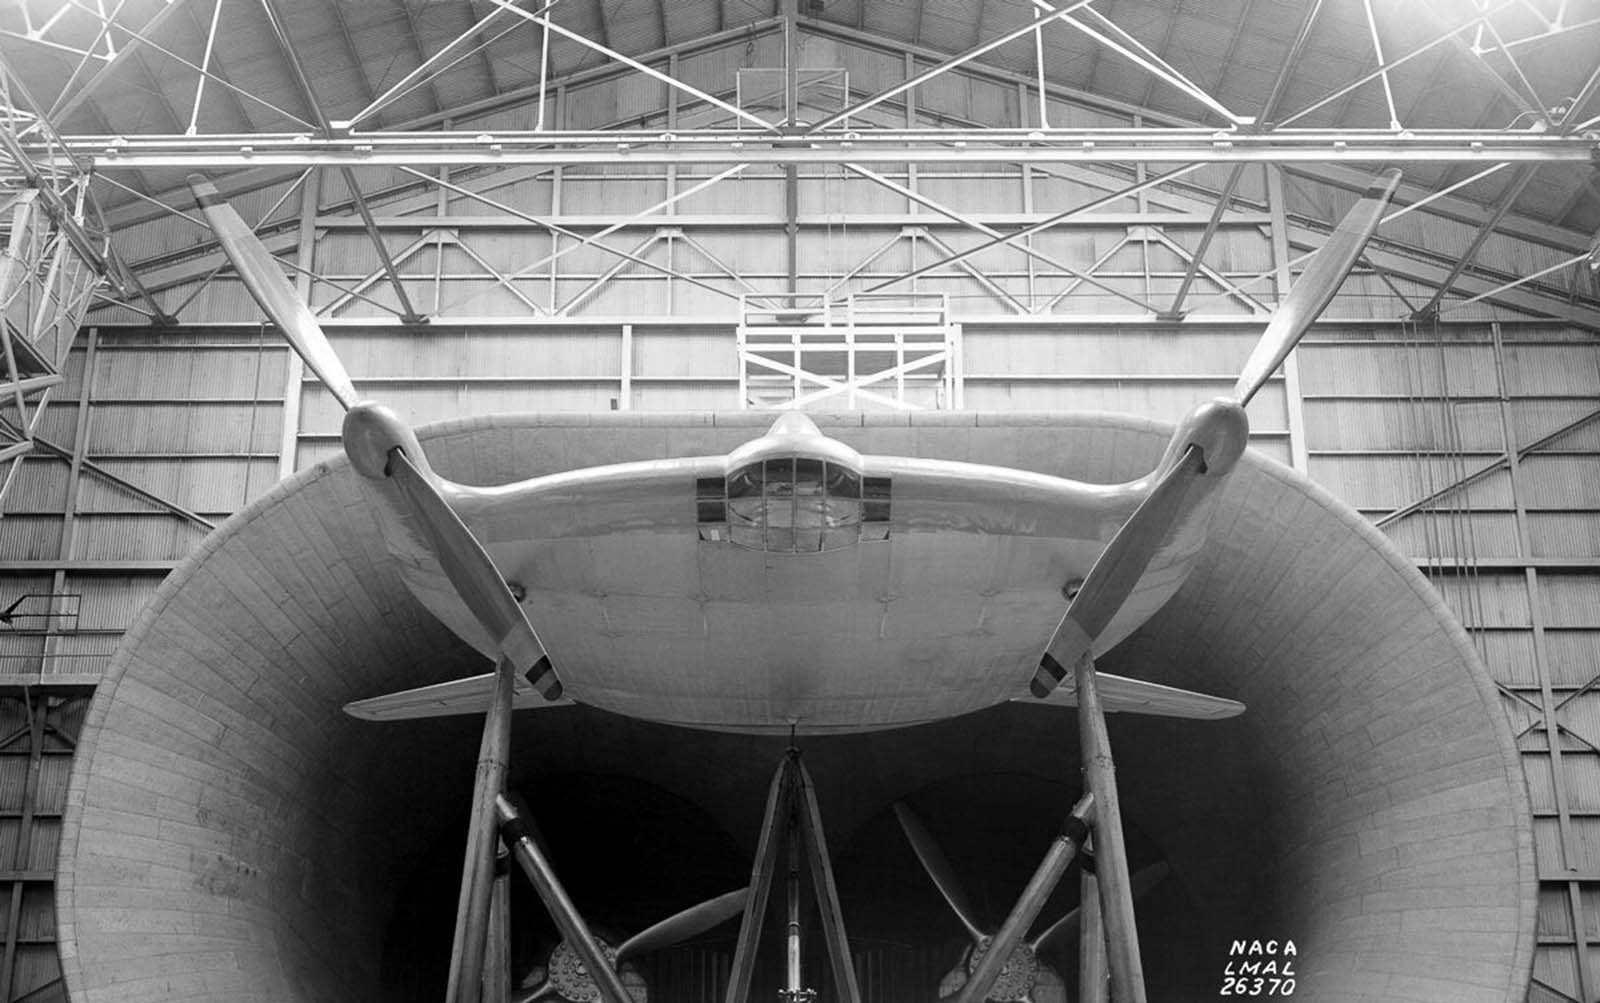 A prototype Vought-Sikorsky V-173 airplane mounted in the Full Scale Wind Tunnel, 1941.